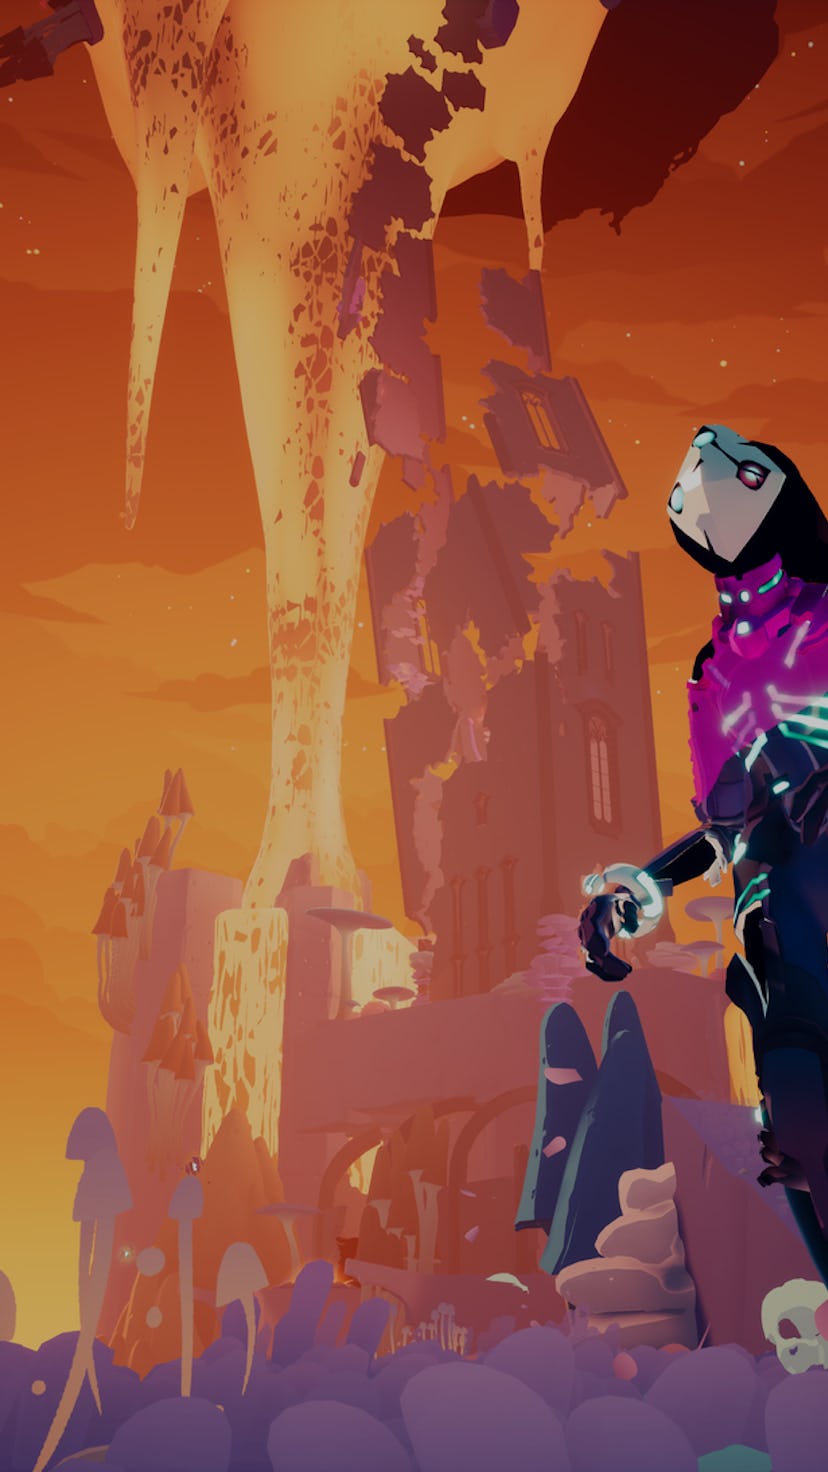 A screenshot from the game Solar Ash showing a futuristic looking person standing against an orange ...